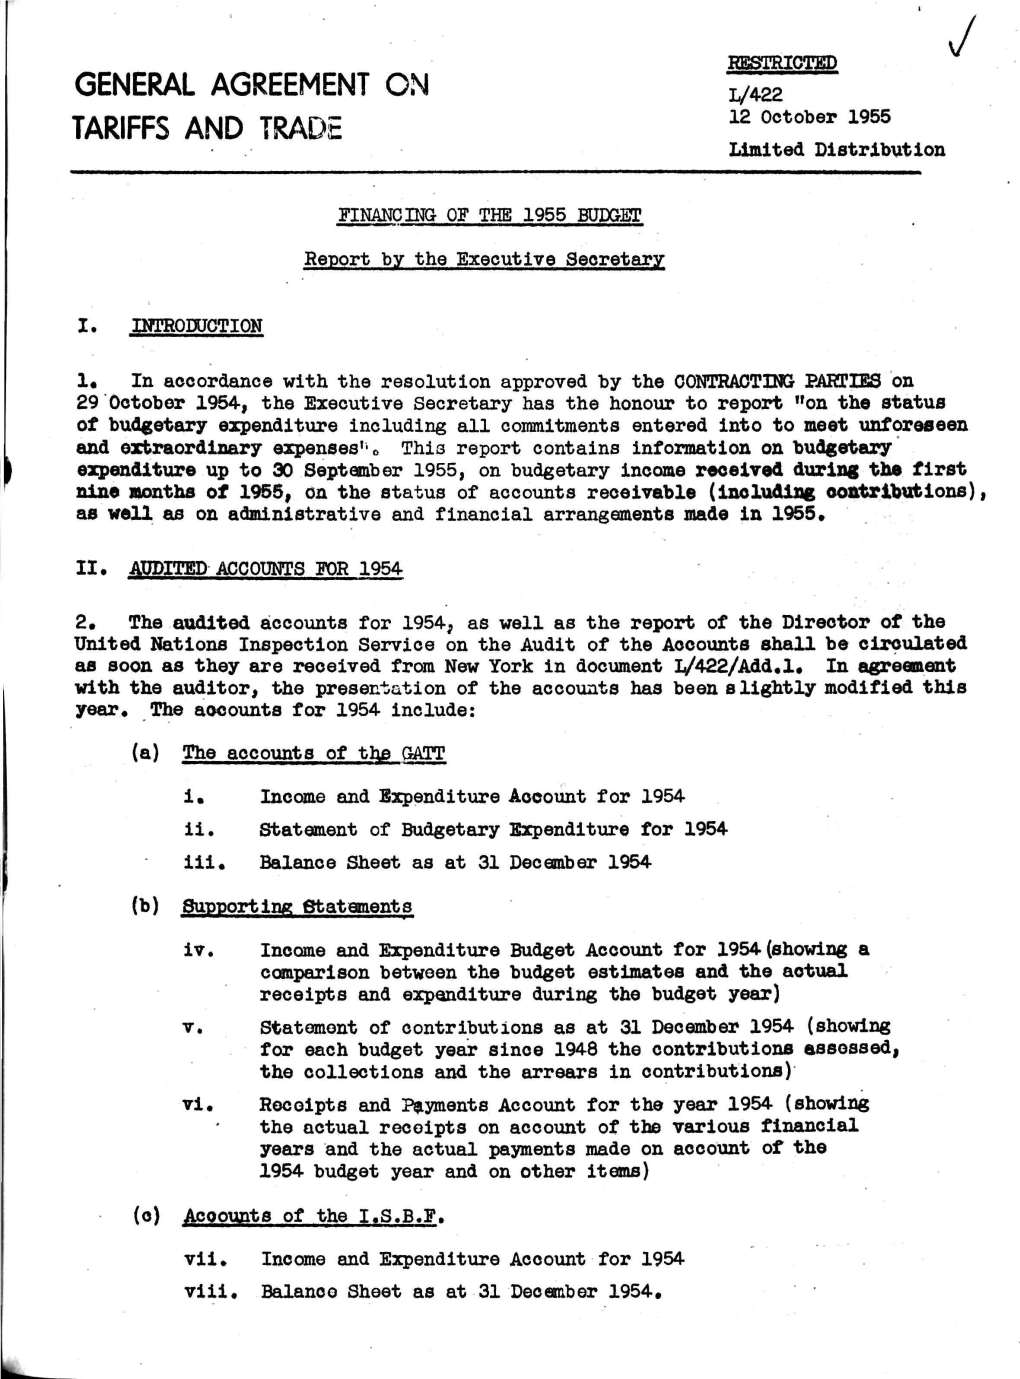 GENERAL AGREEMENT on ^ TARIFFS and TRADE 12 October 1955 Limited Distribution